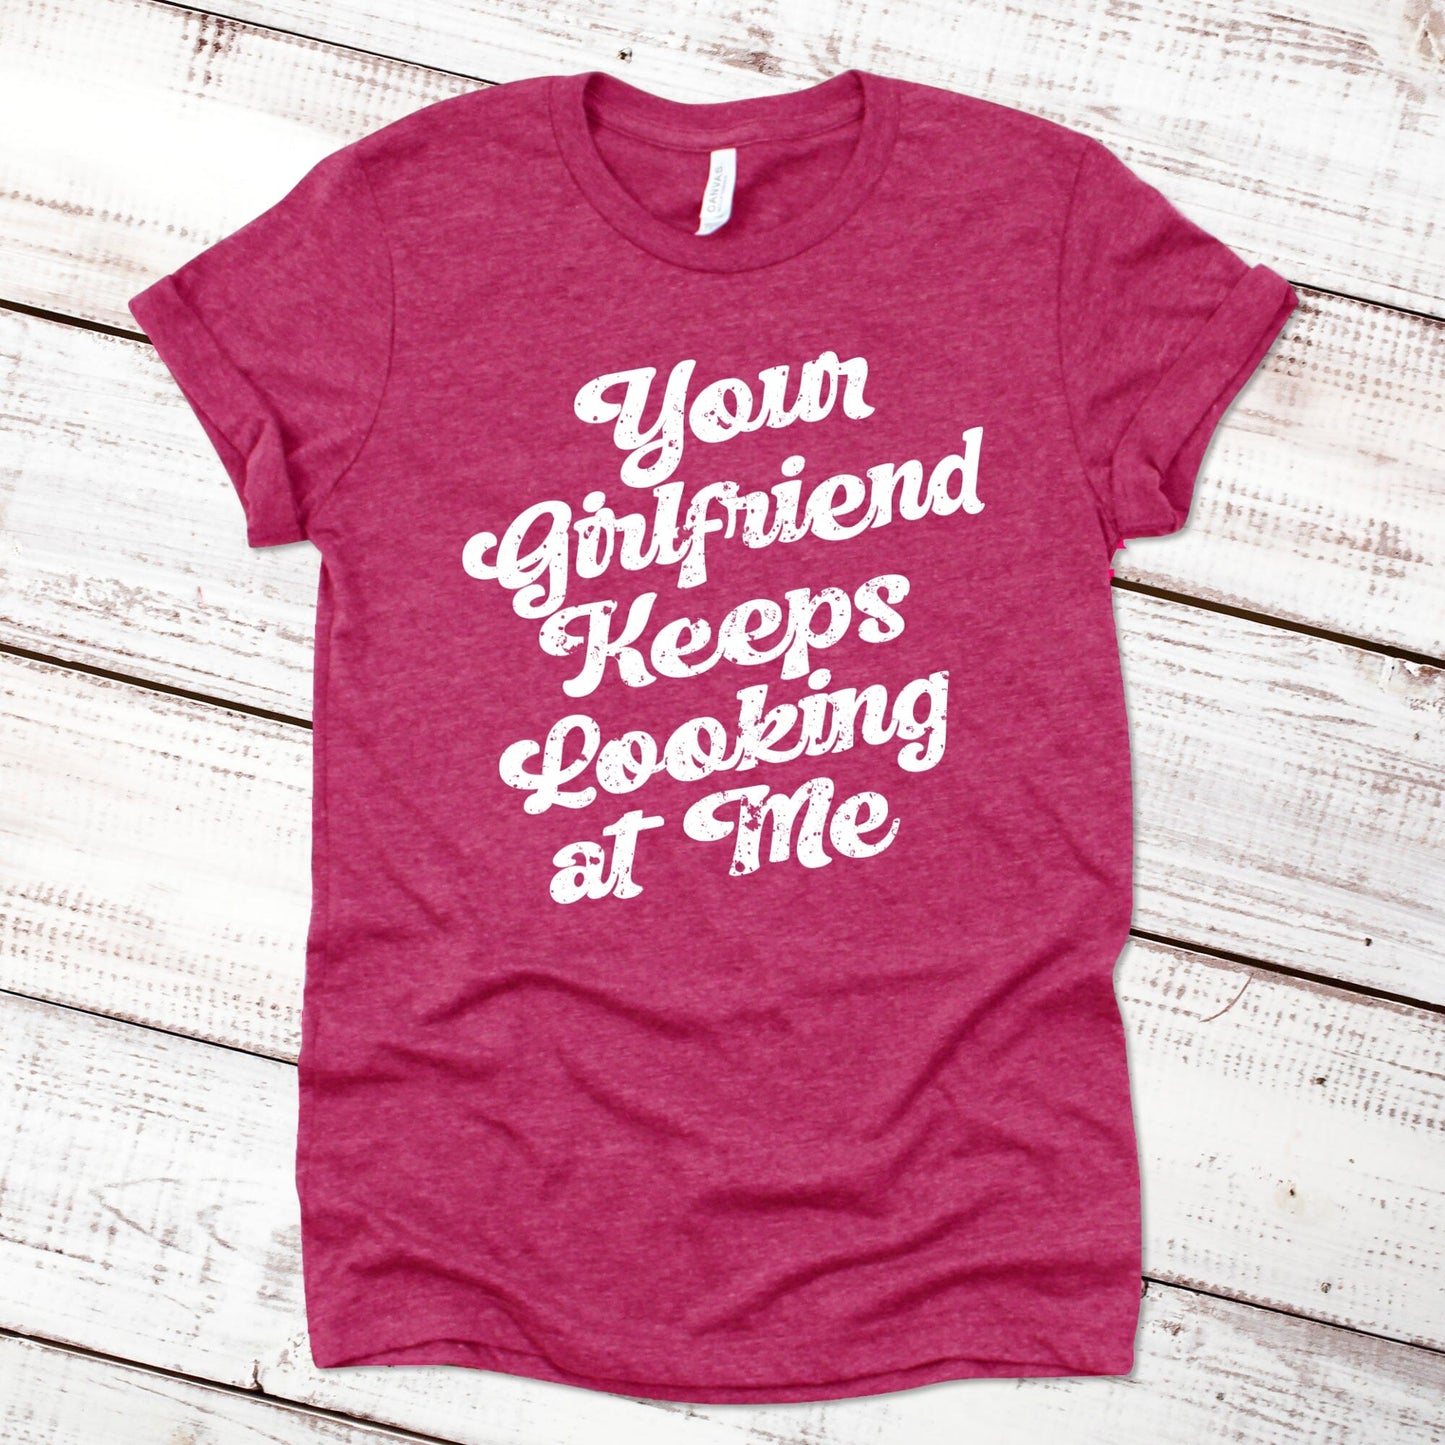 Your Girlfriend Keeps Looking at Me Funny Shirt Imprint Maker Heather Raspberry XS 